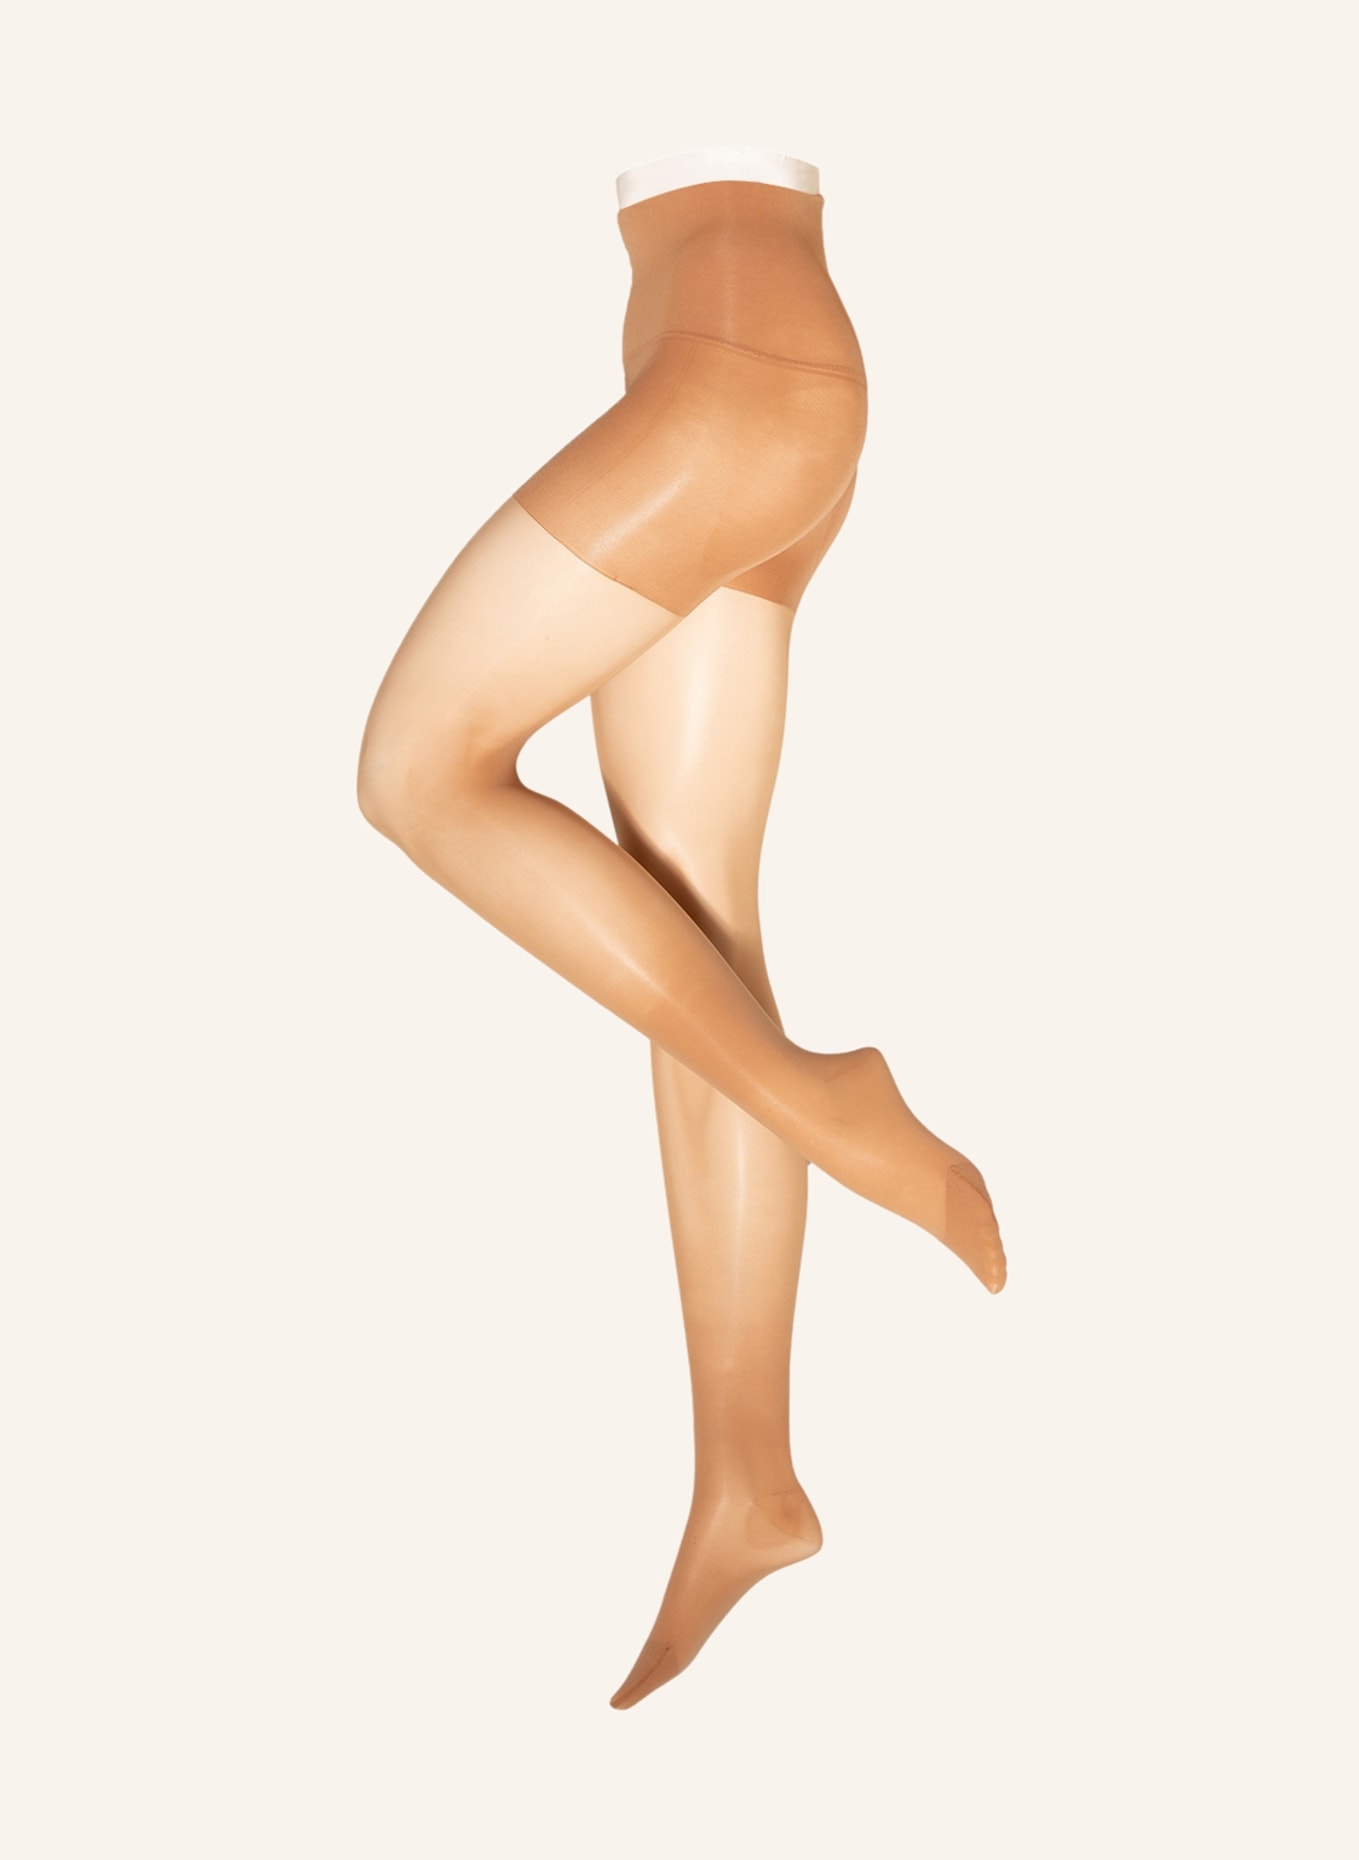 ITEM m6 Nylon pantyhose CONTROL TOP with shaping effect , Color: 740 light beige(Image null)